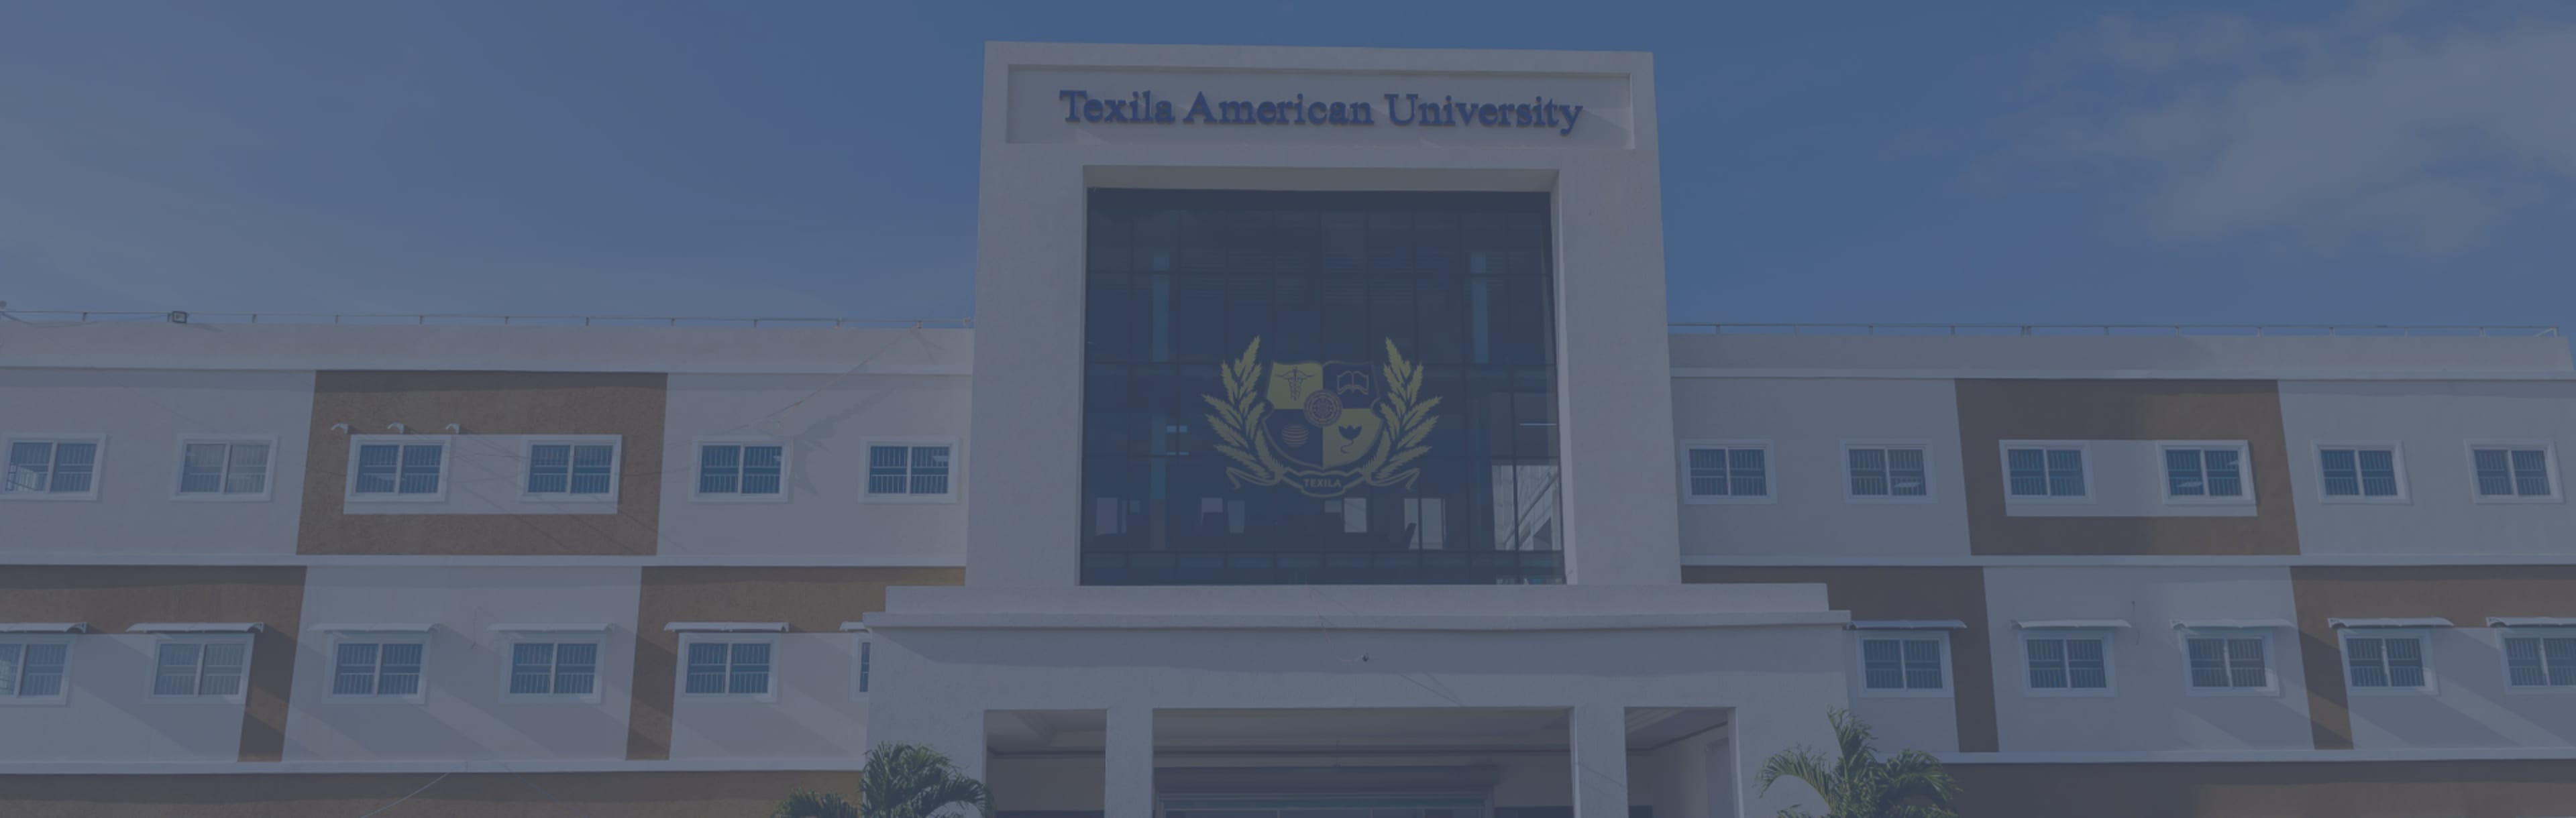 Texila American University Doctor of Business Administration